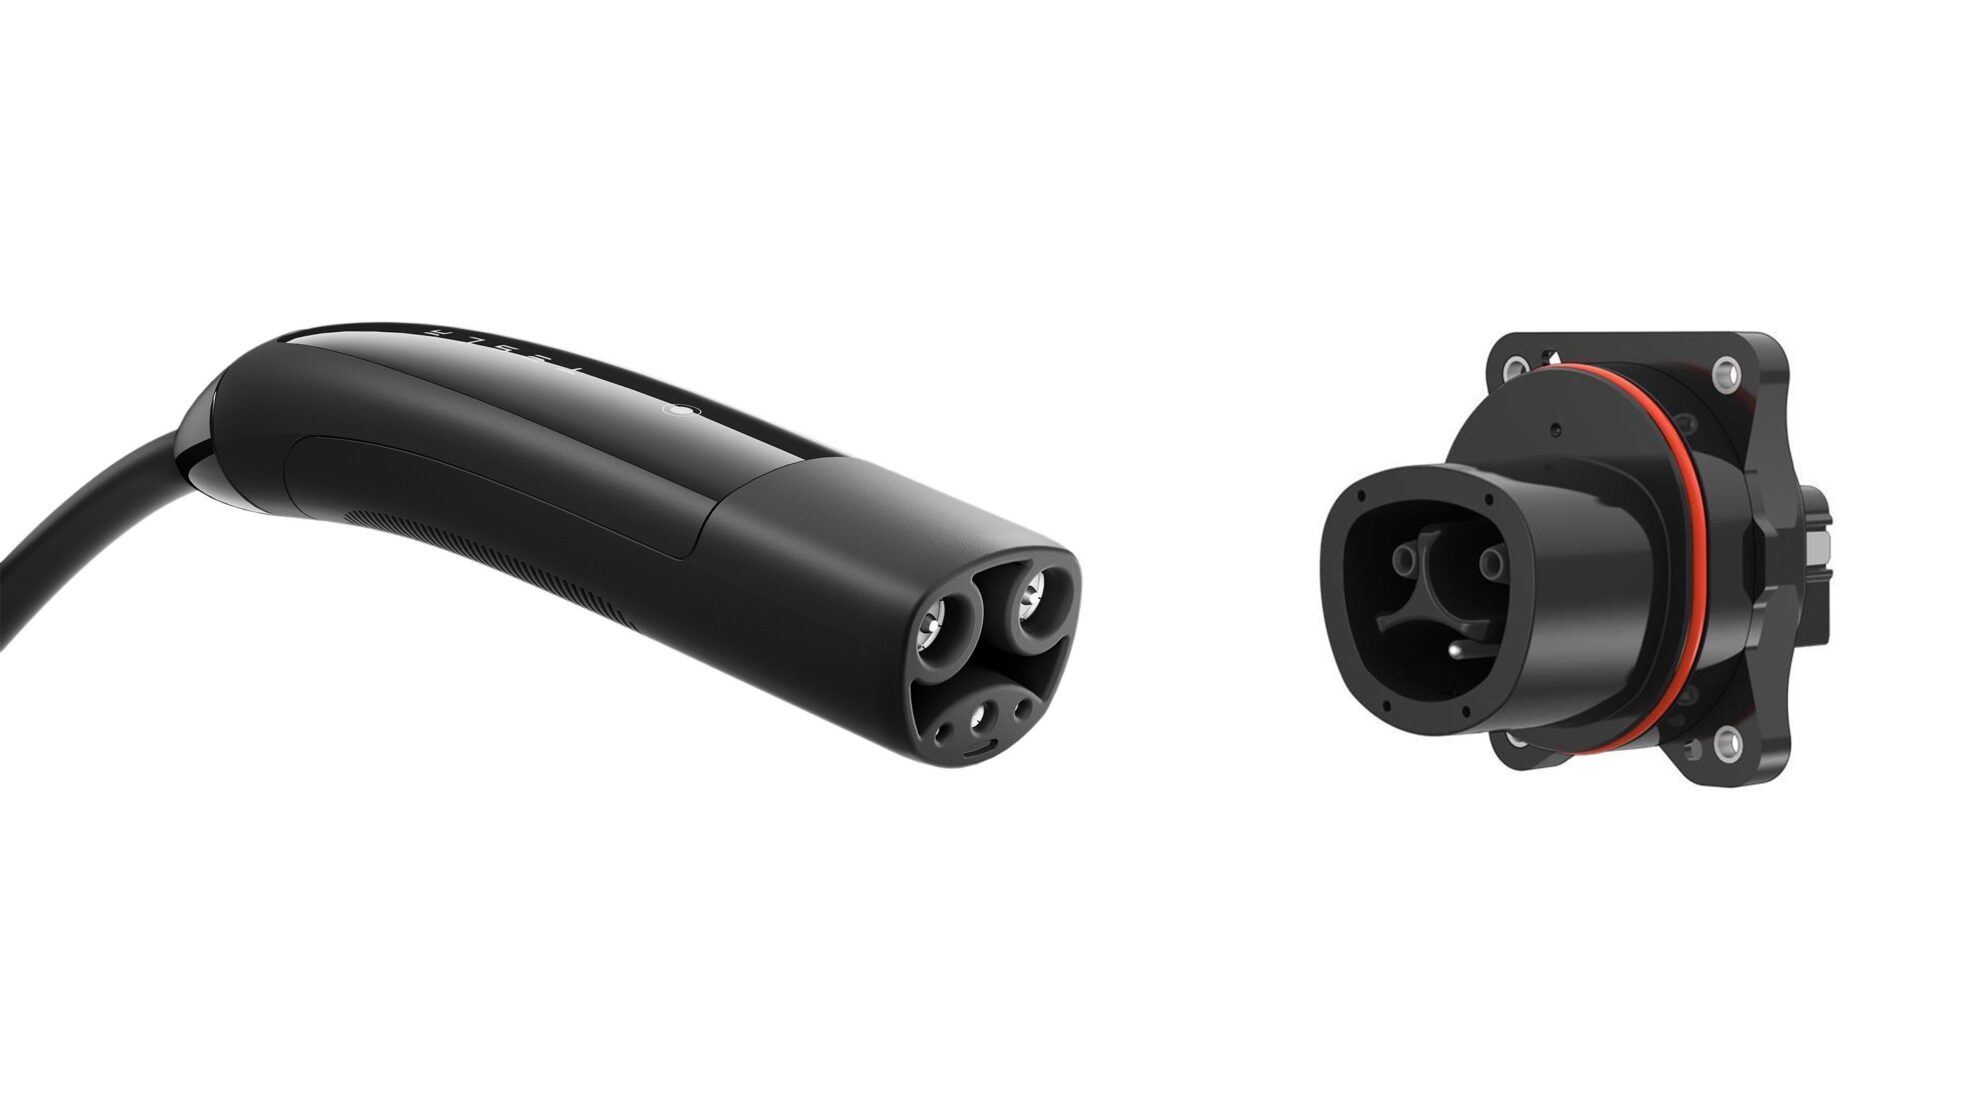 Tesla opens its charging connector design in pursuit of making it the